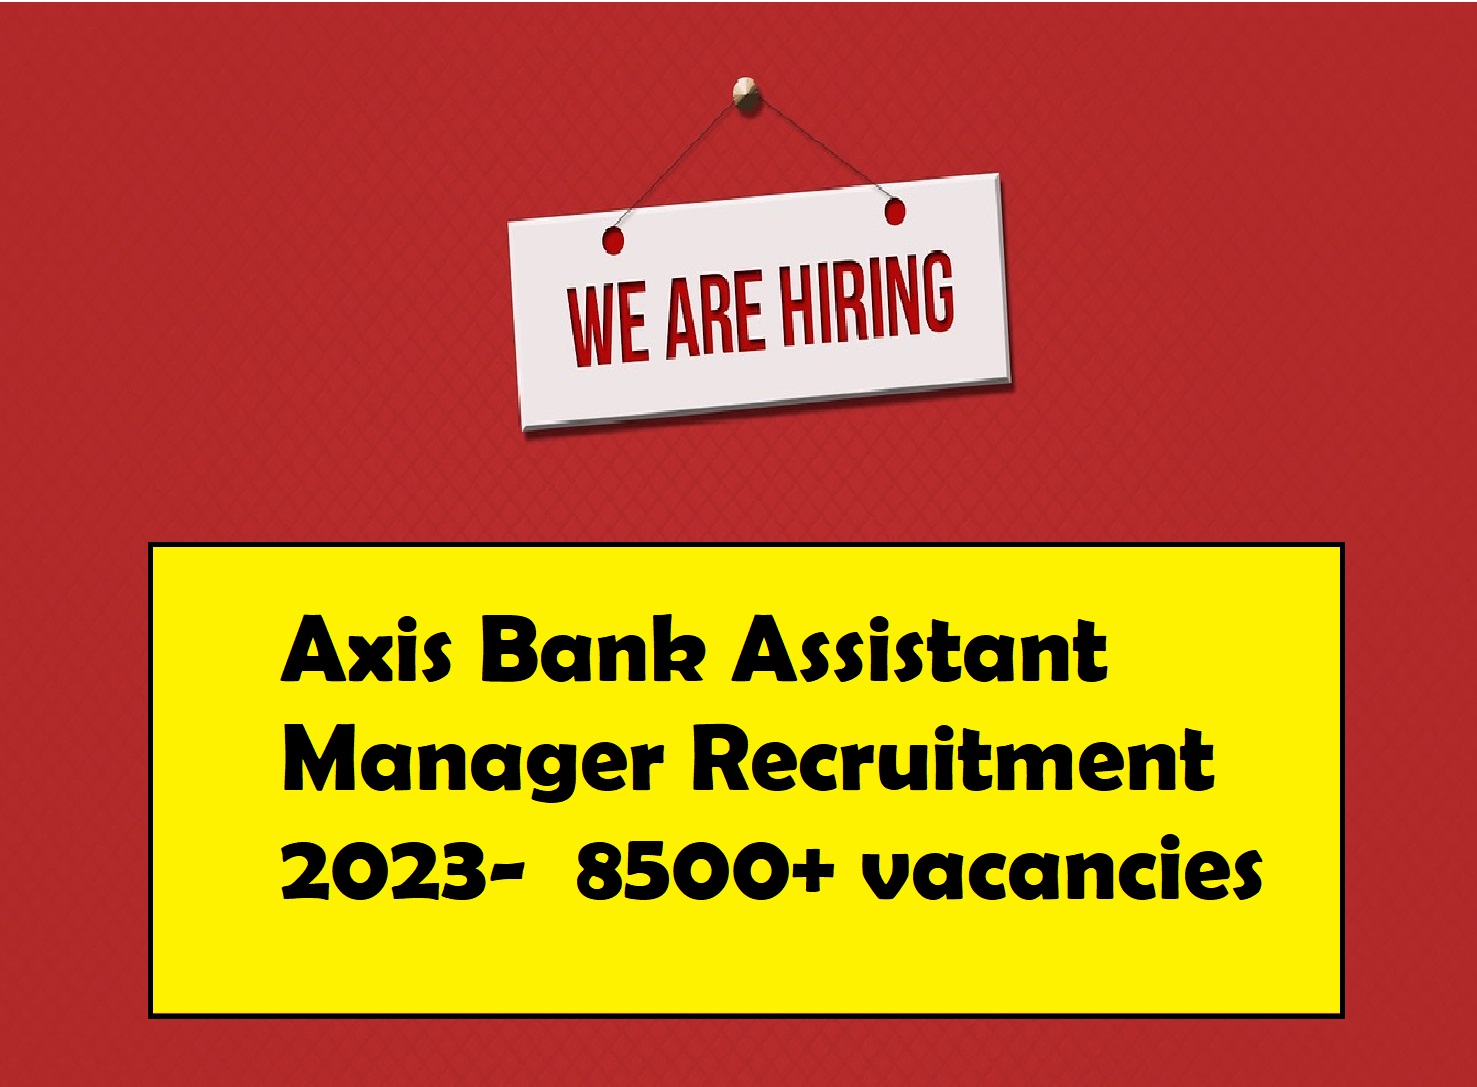 Axis Bank Assistant Manager Recruitment